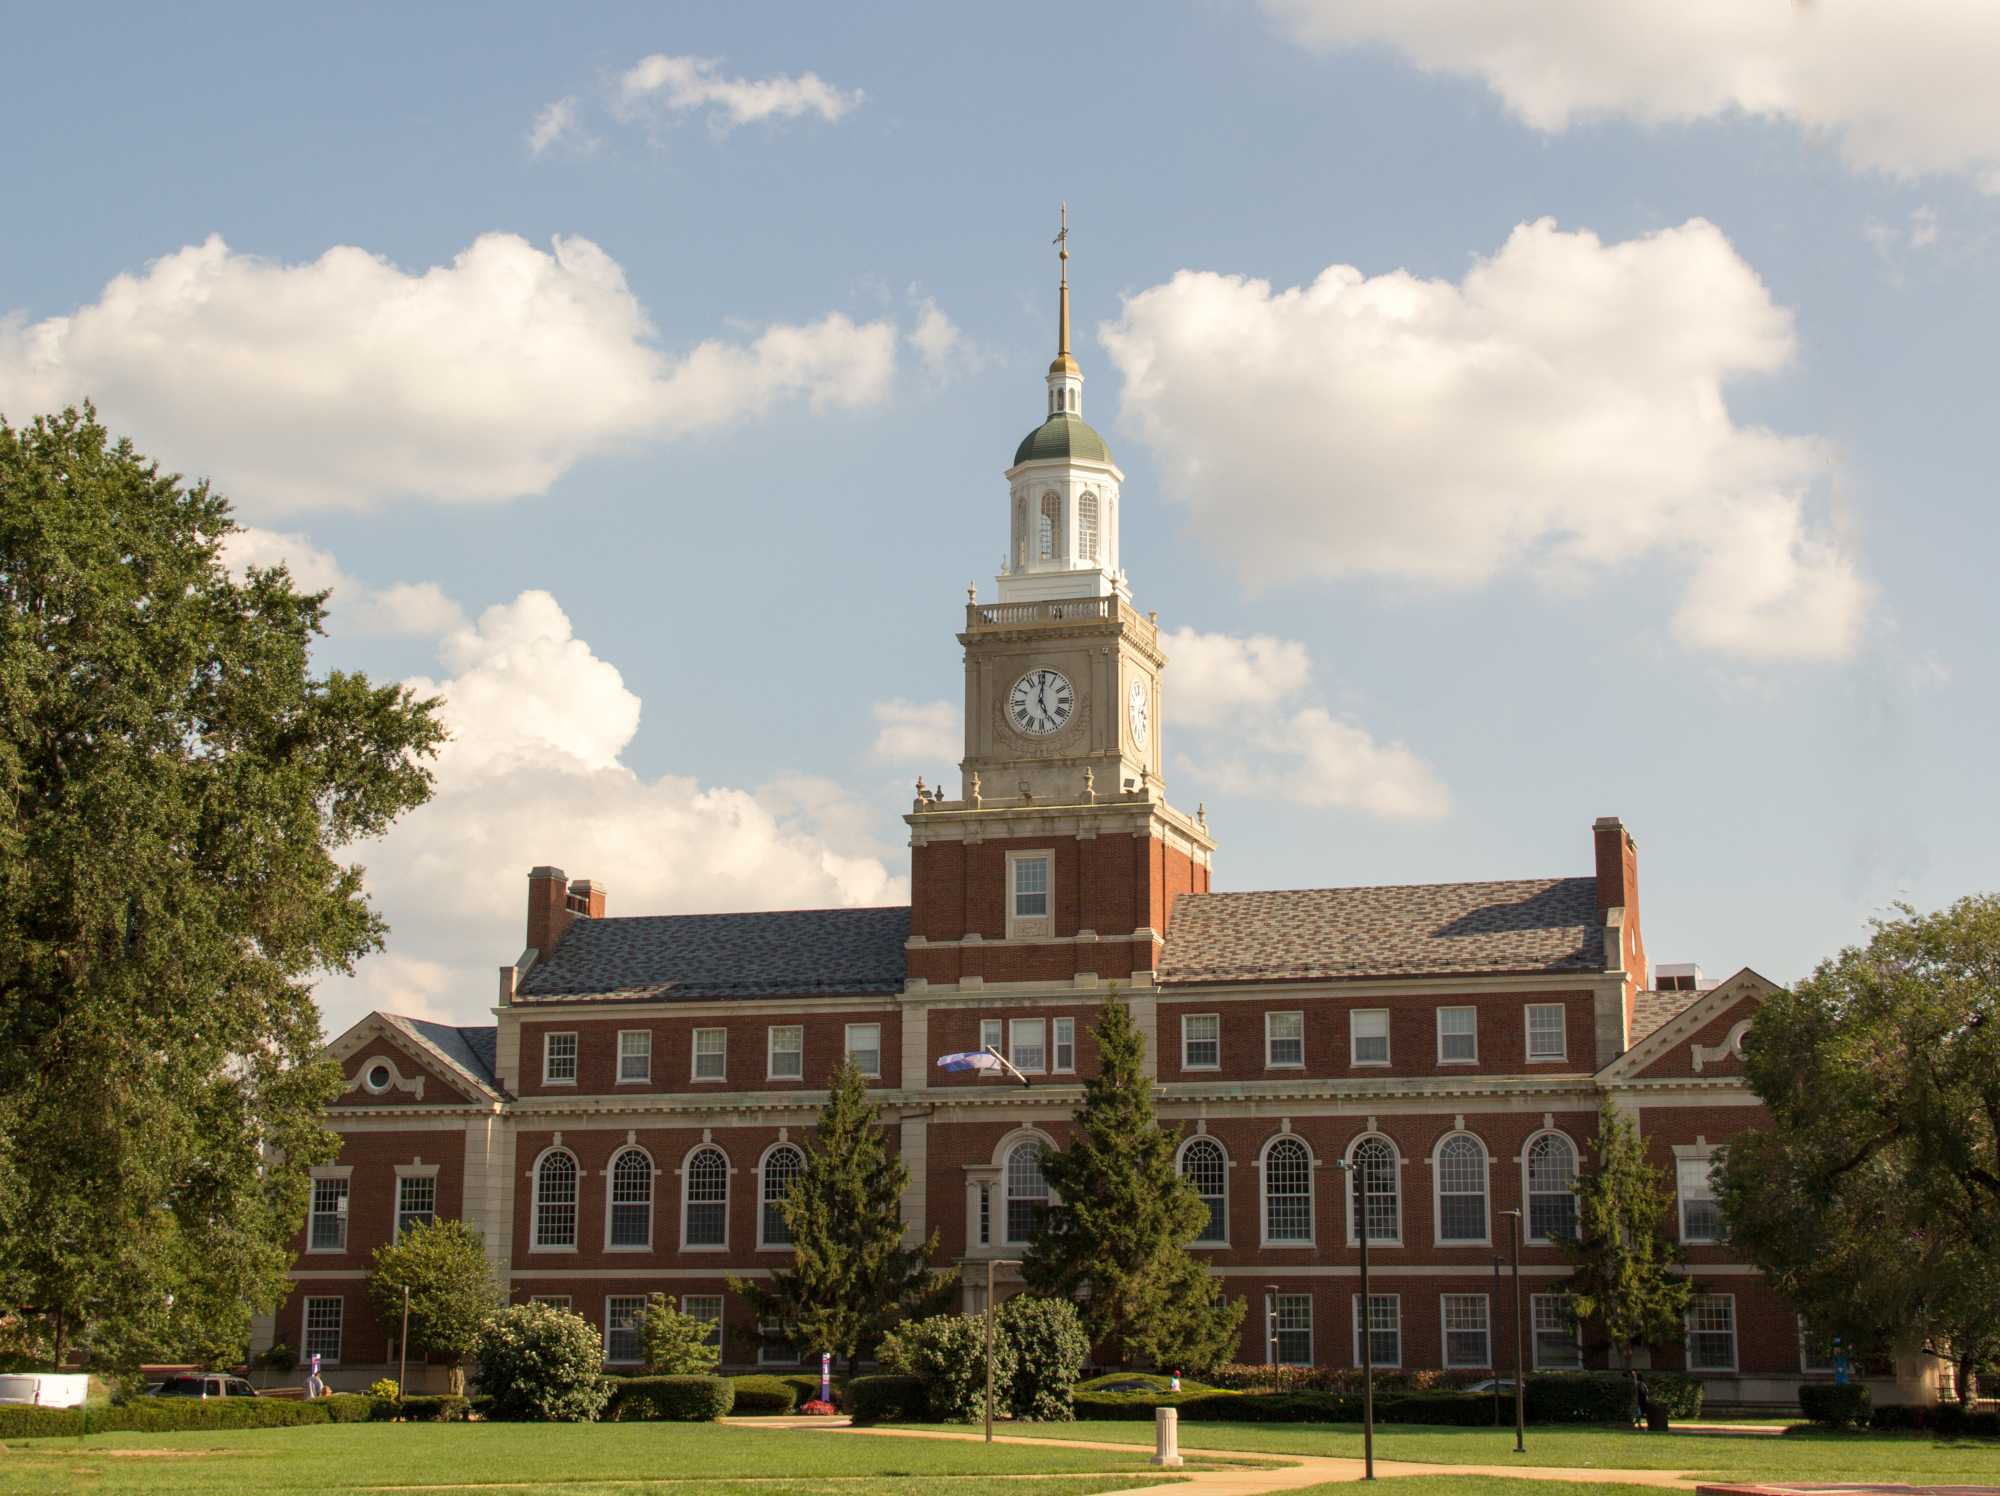 The Founder's Library at Howard University is a colonial style, brick building with a large clock tower in the middle.